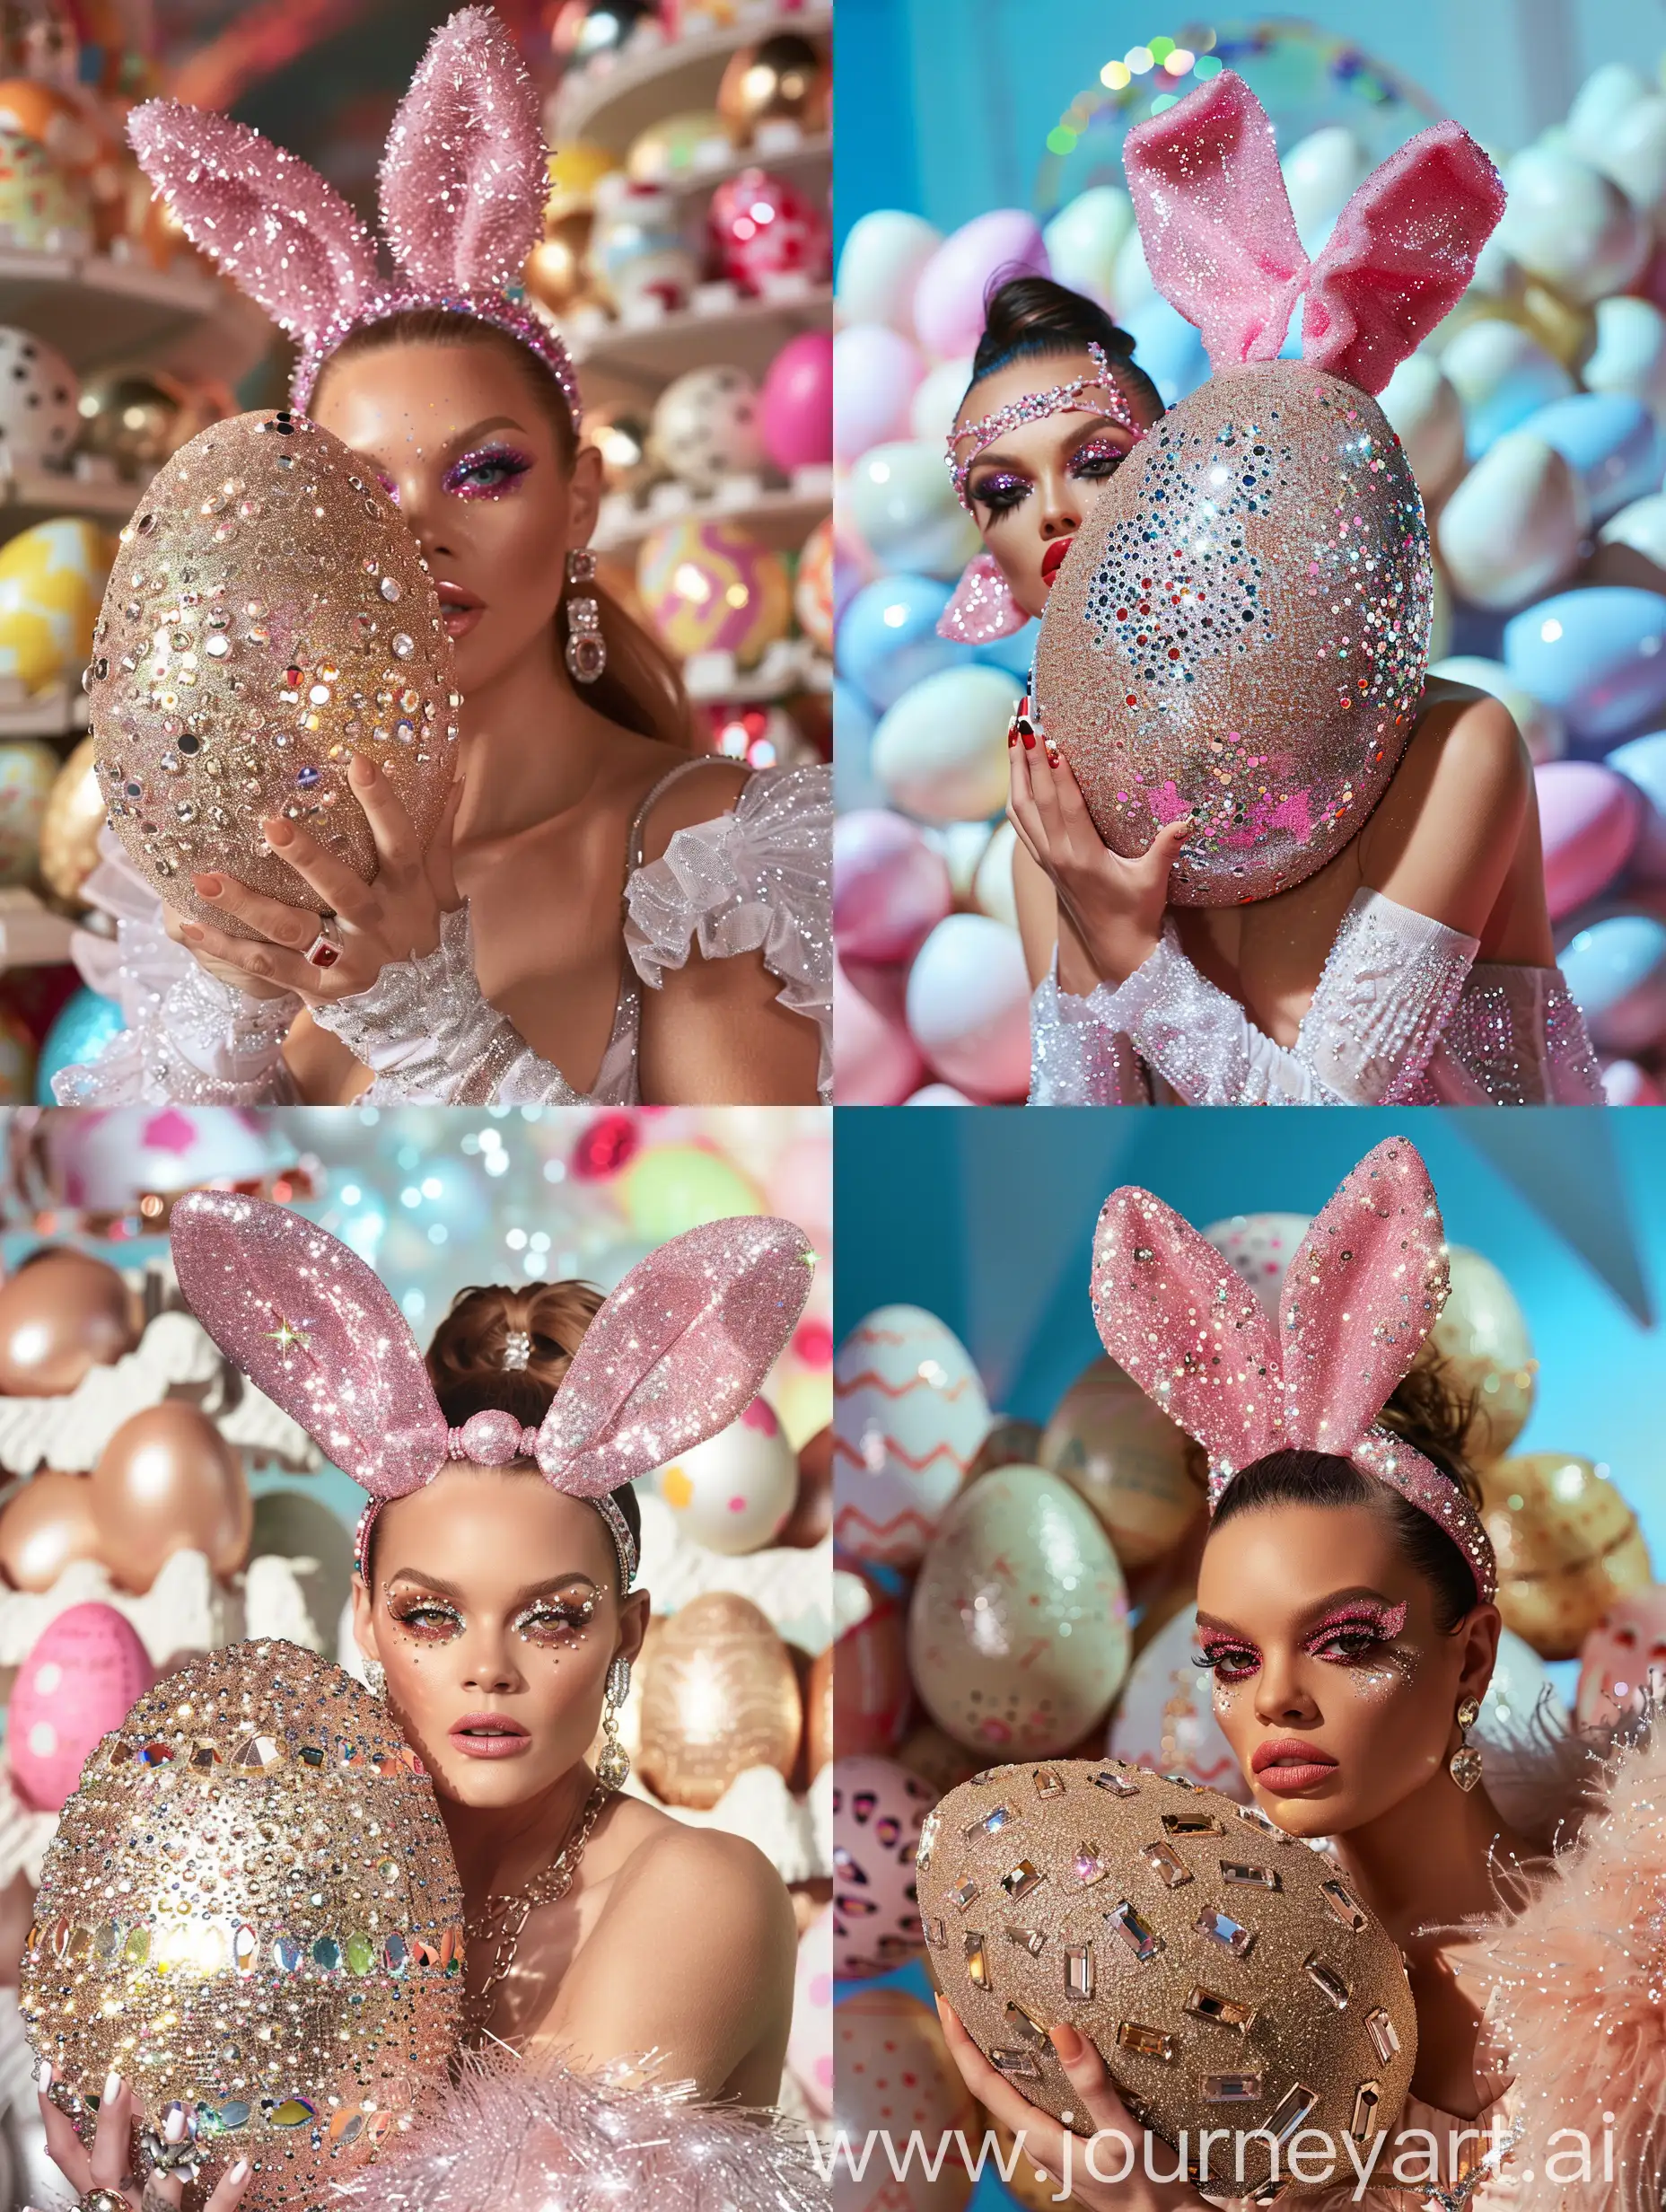 Glamorous-Rita-Ora-Lookalike-with-Pink-Glittery-Bunny-Ears-Headband-and-Sparkling-Easter-Egg